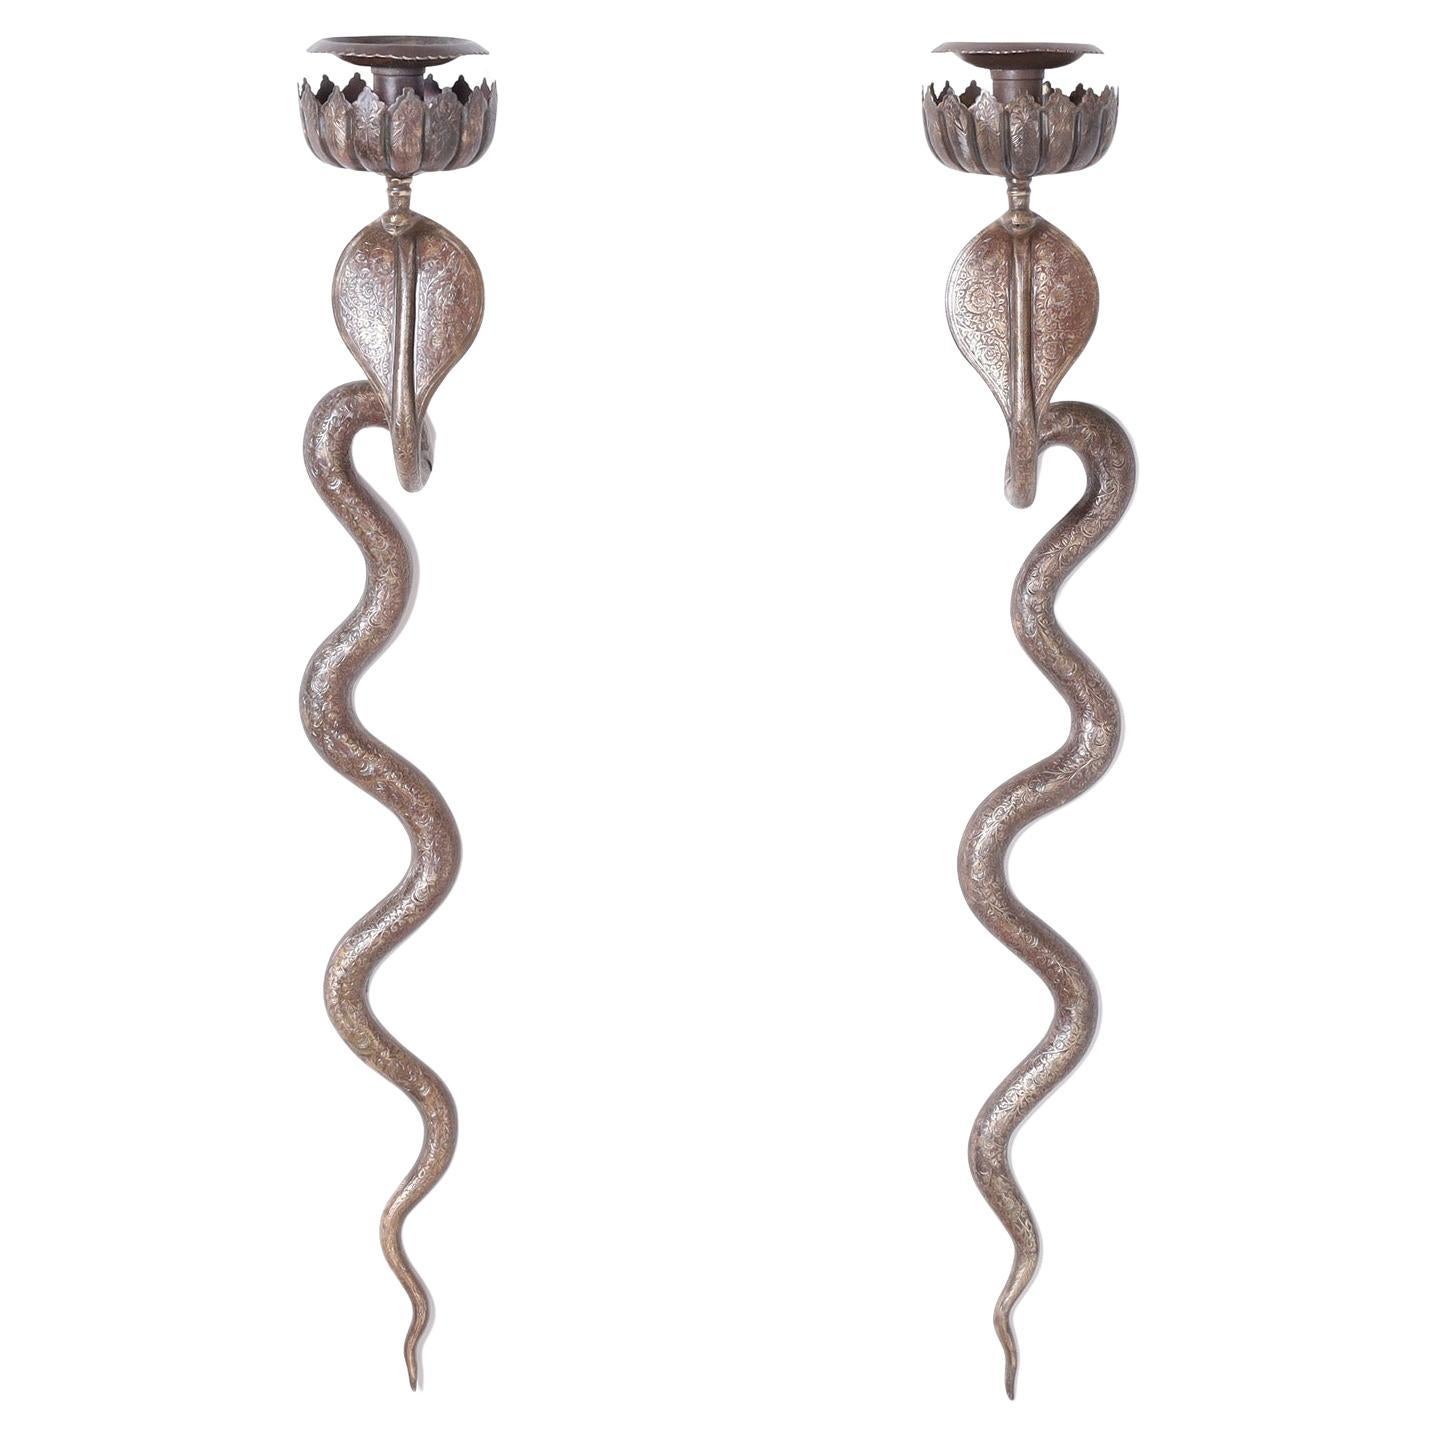 Pair of Vintage Anglo Indian Cobra Wall Sconces